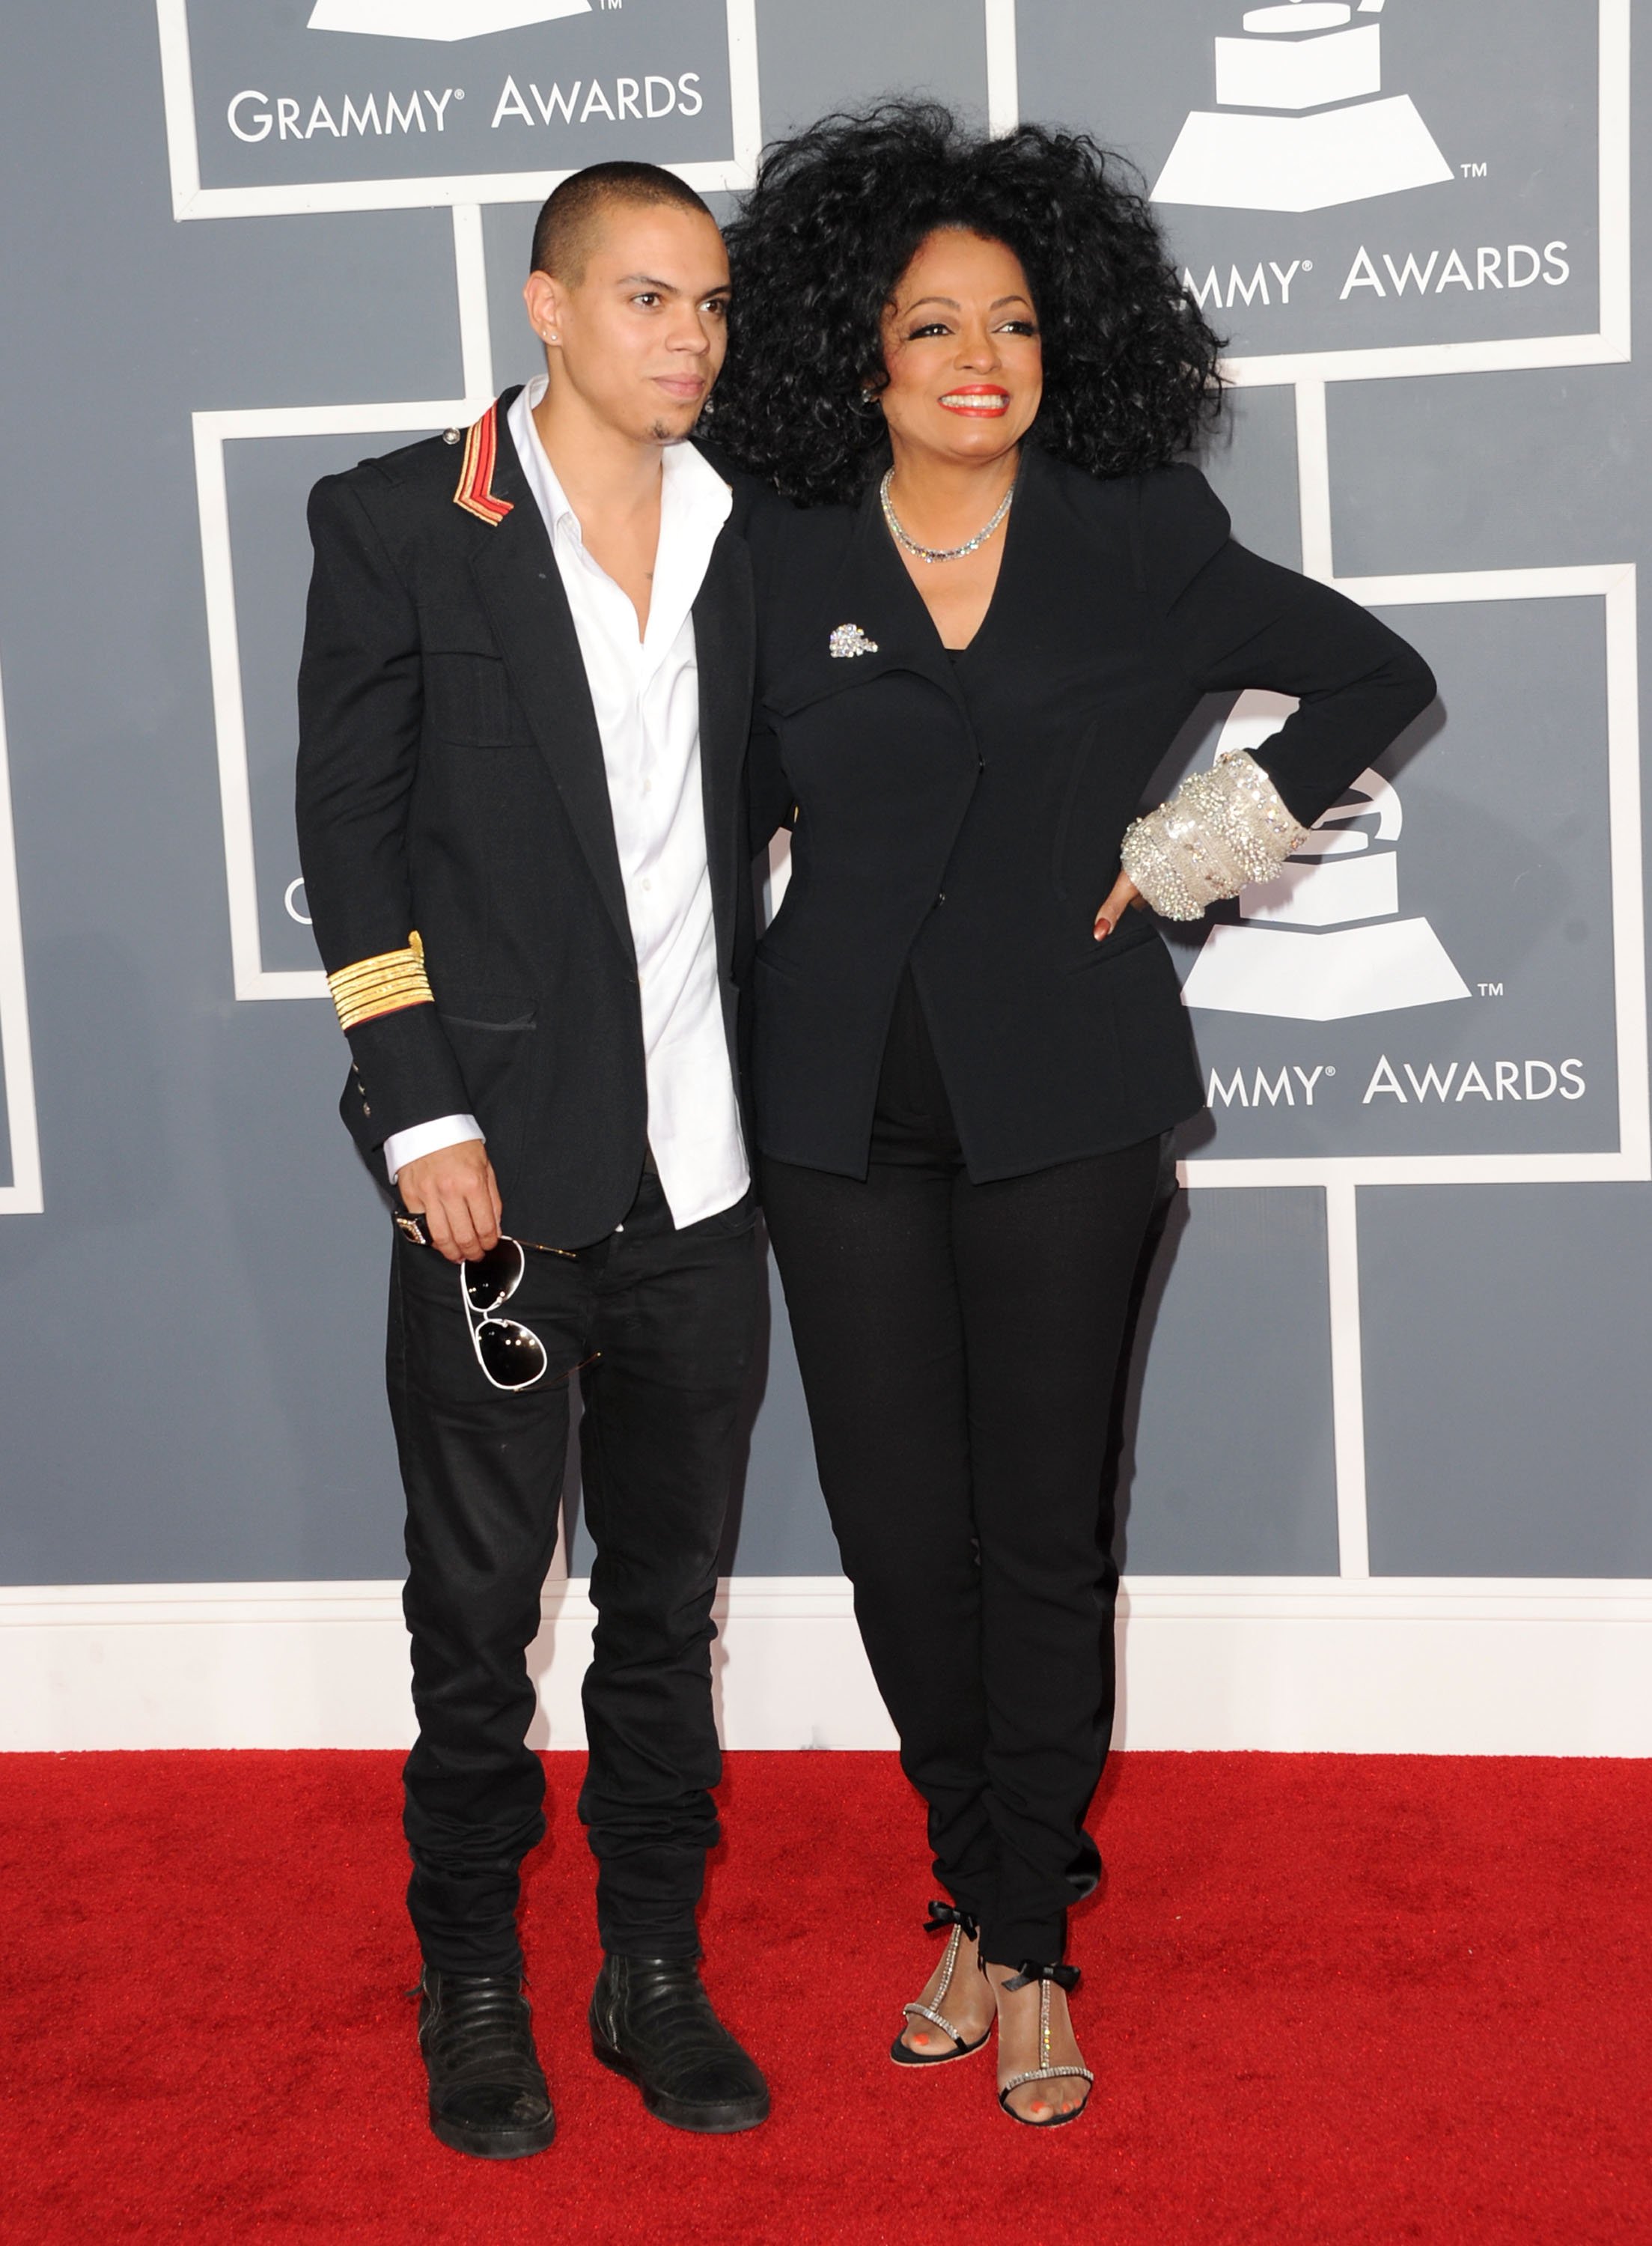 Diana Ross (R) and son Evan Ross at the 54th Annual GRAMMY Awards held at Staples Center on February 12, 2012 in Los Angeles, California. | Source: Getty 